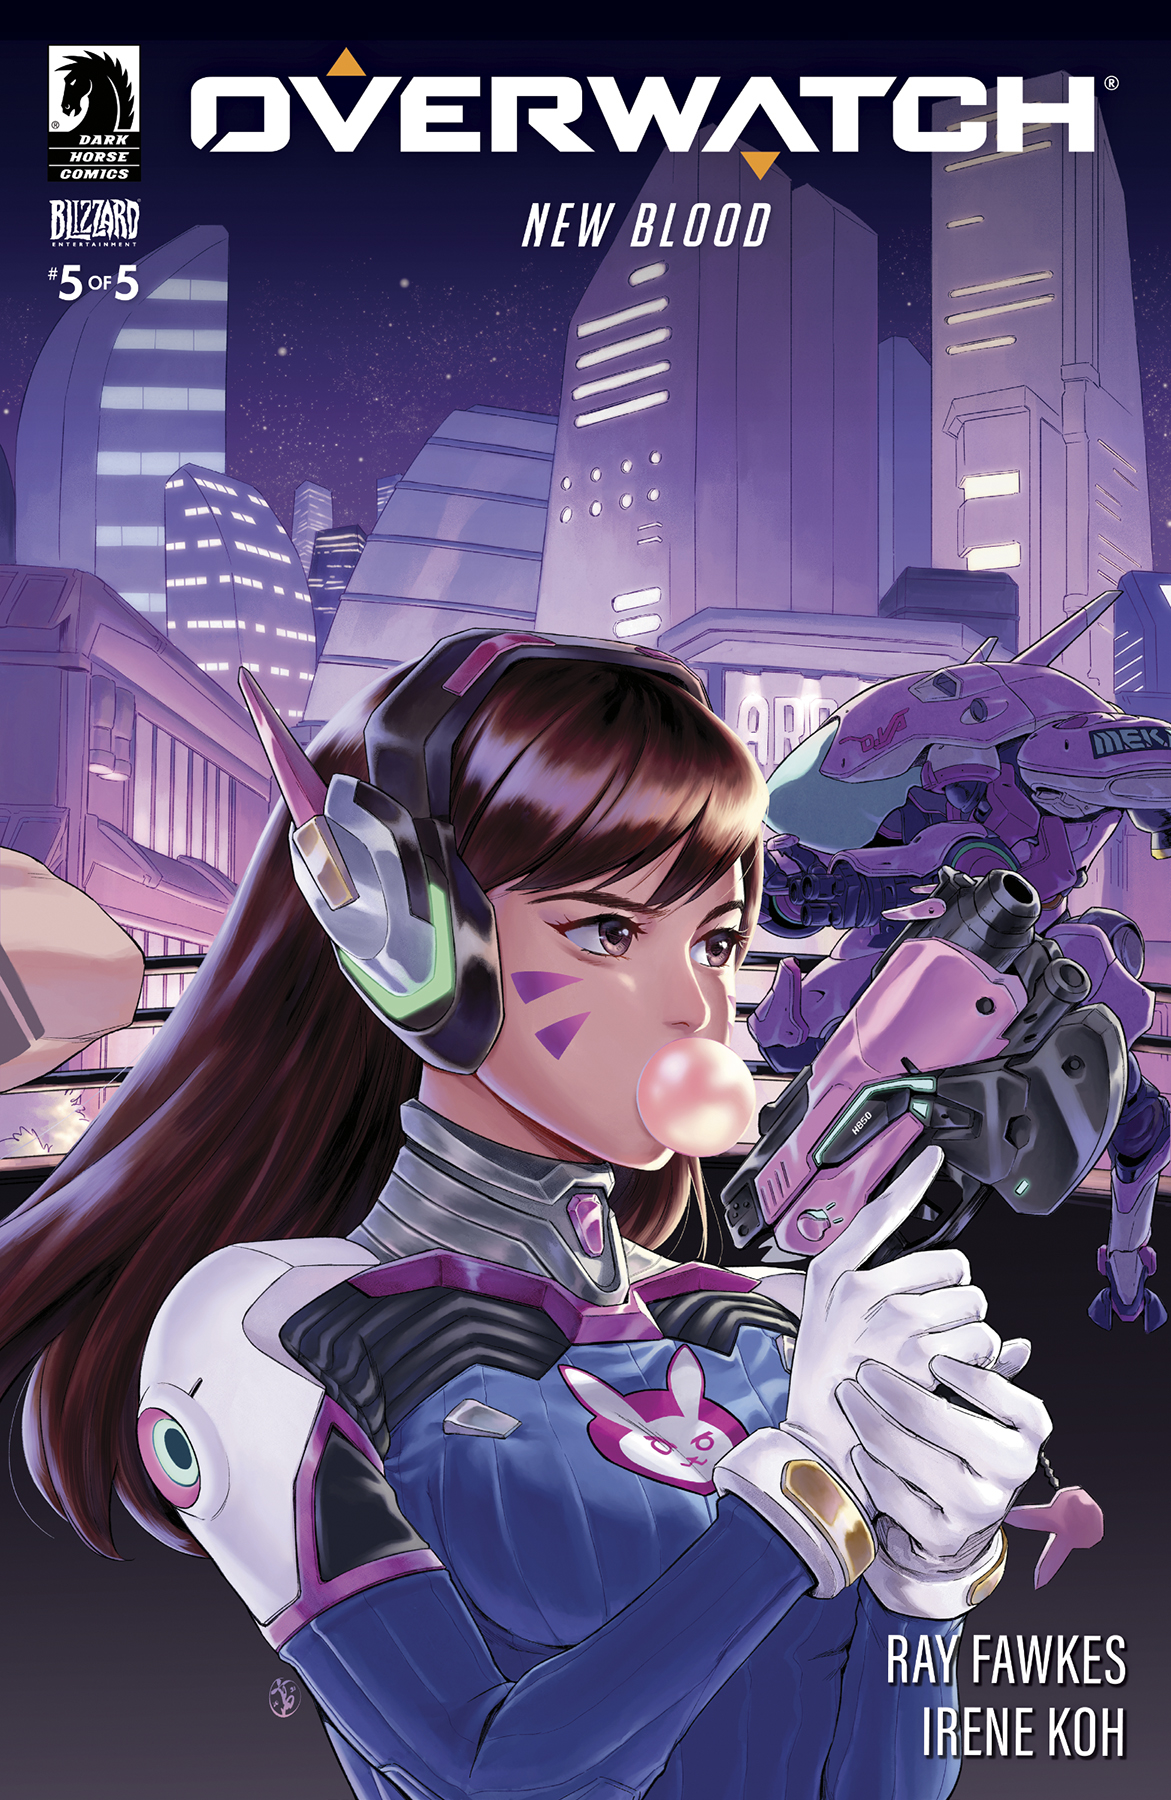 Overwatch New Blood #5 Cover A Koh (Of 5)